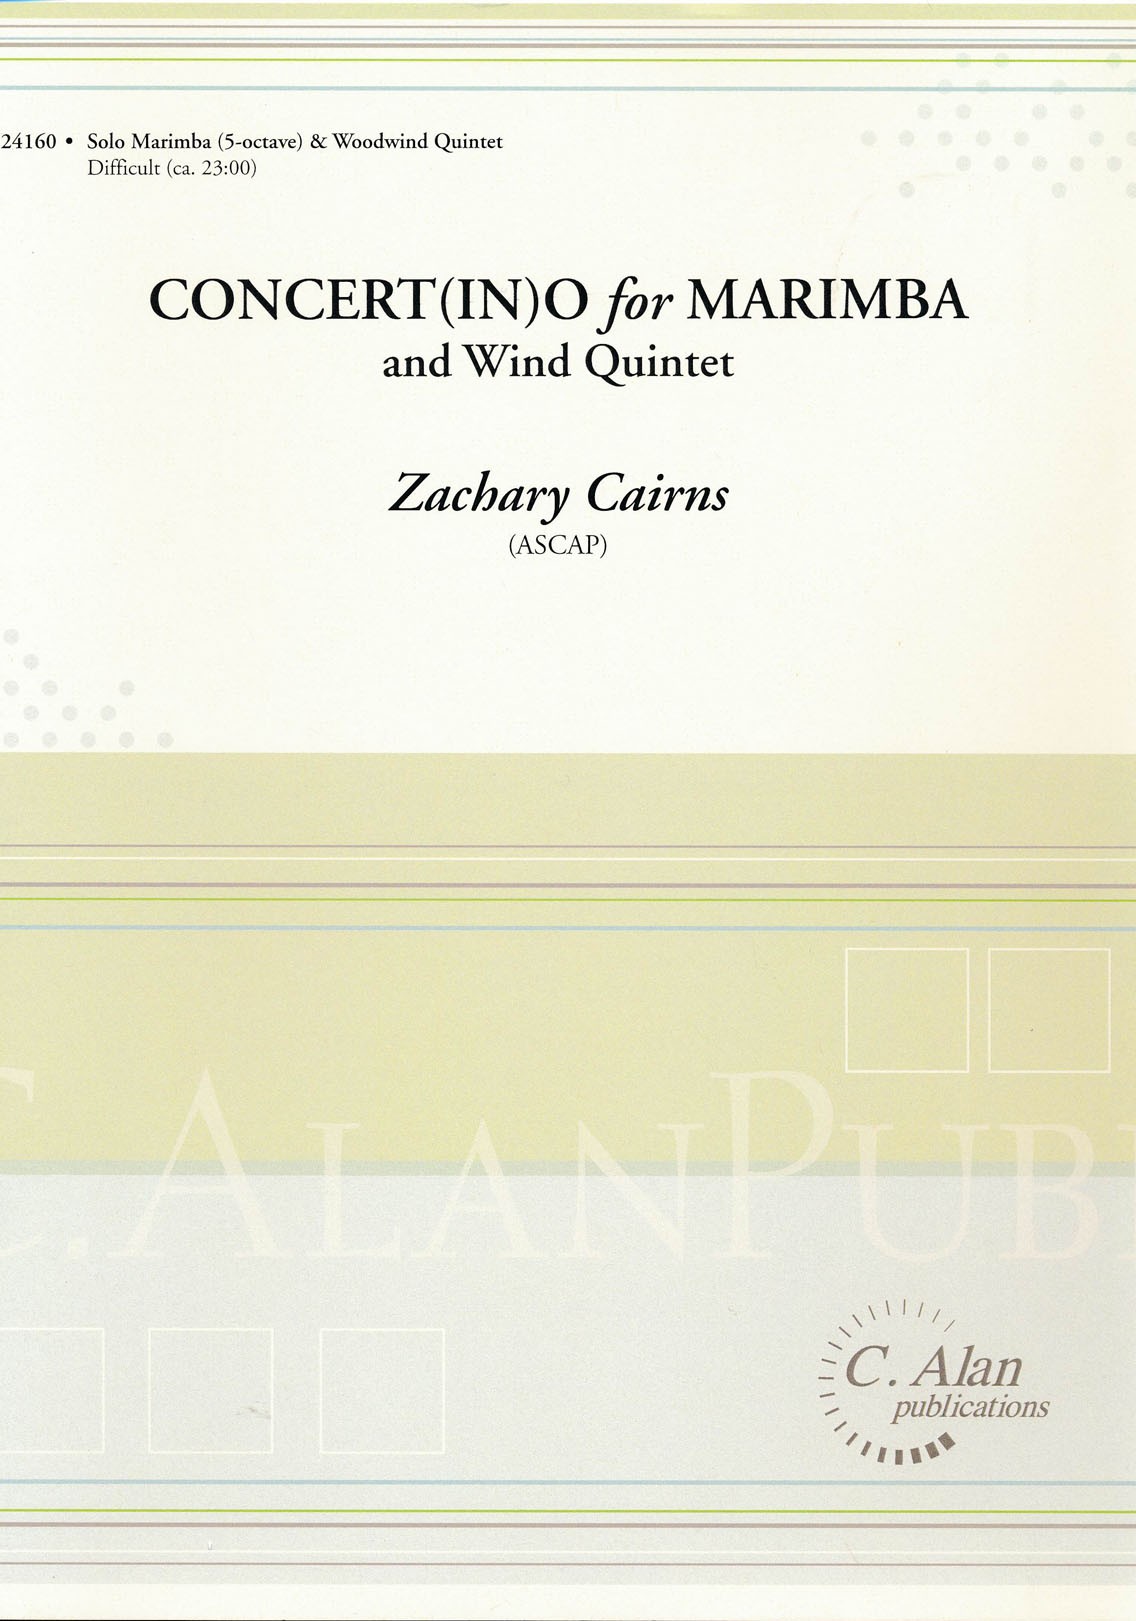 Concert(IN)o for Marimba and wind quintet by Zachary Cairns